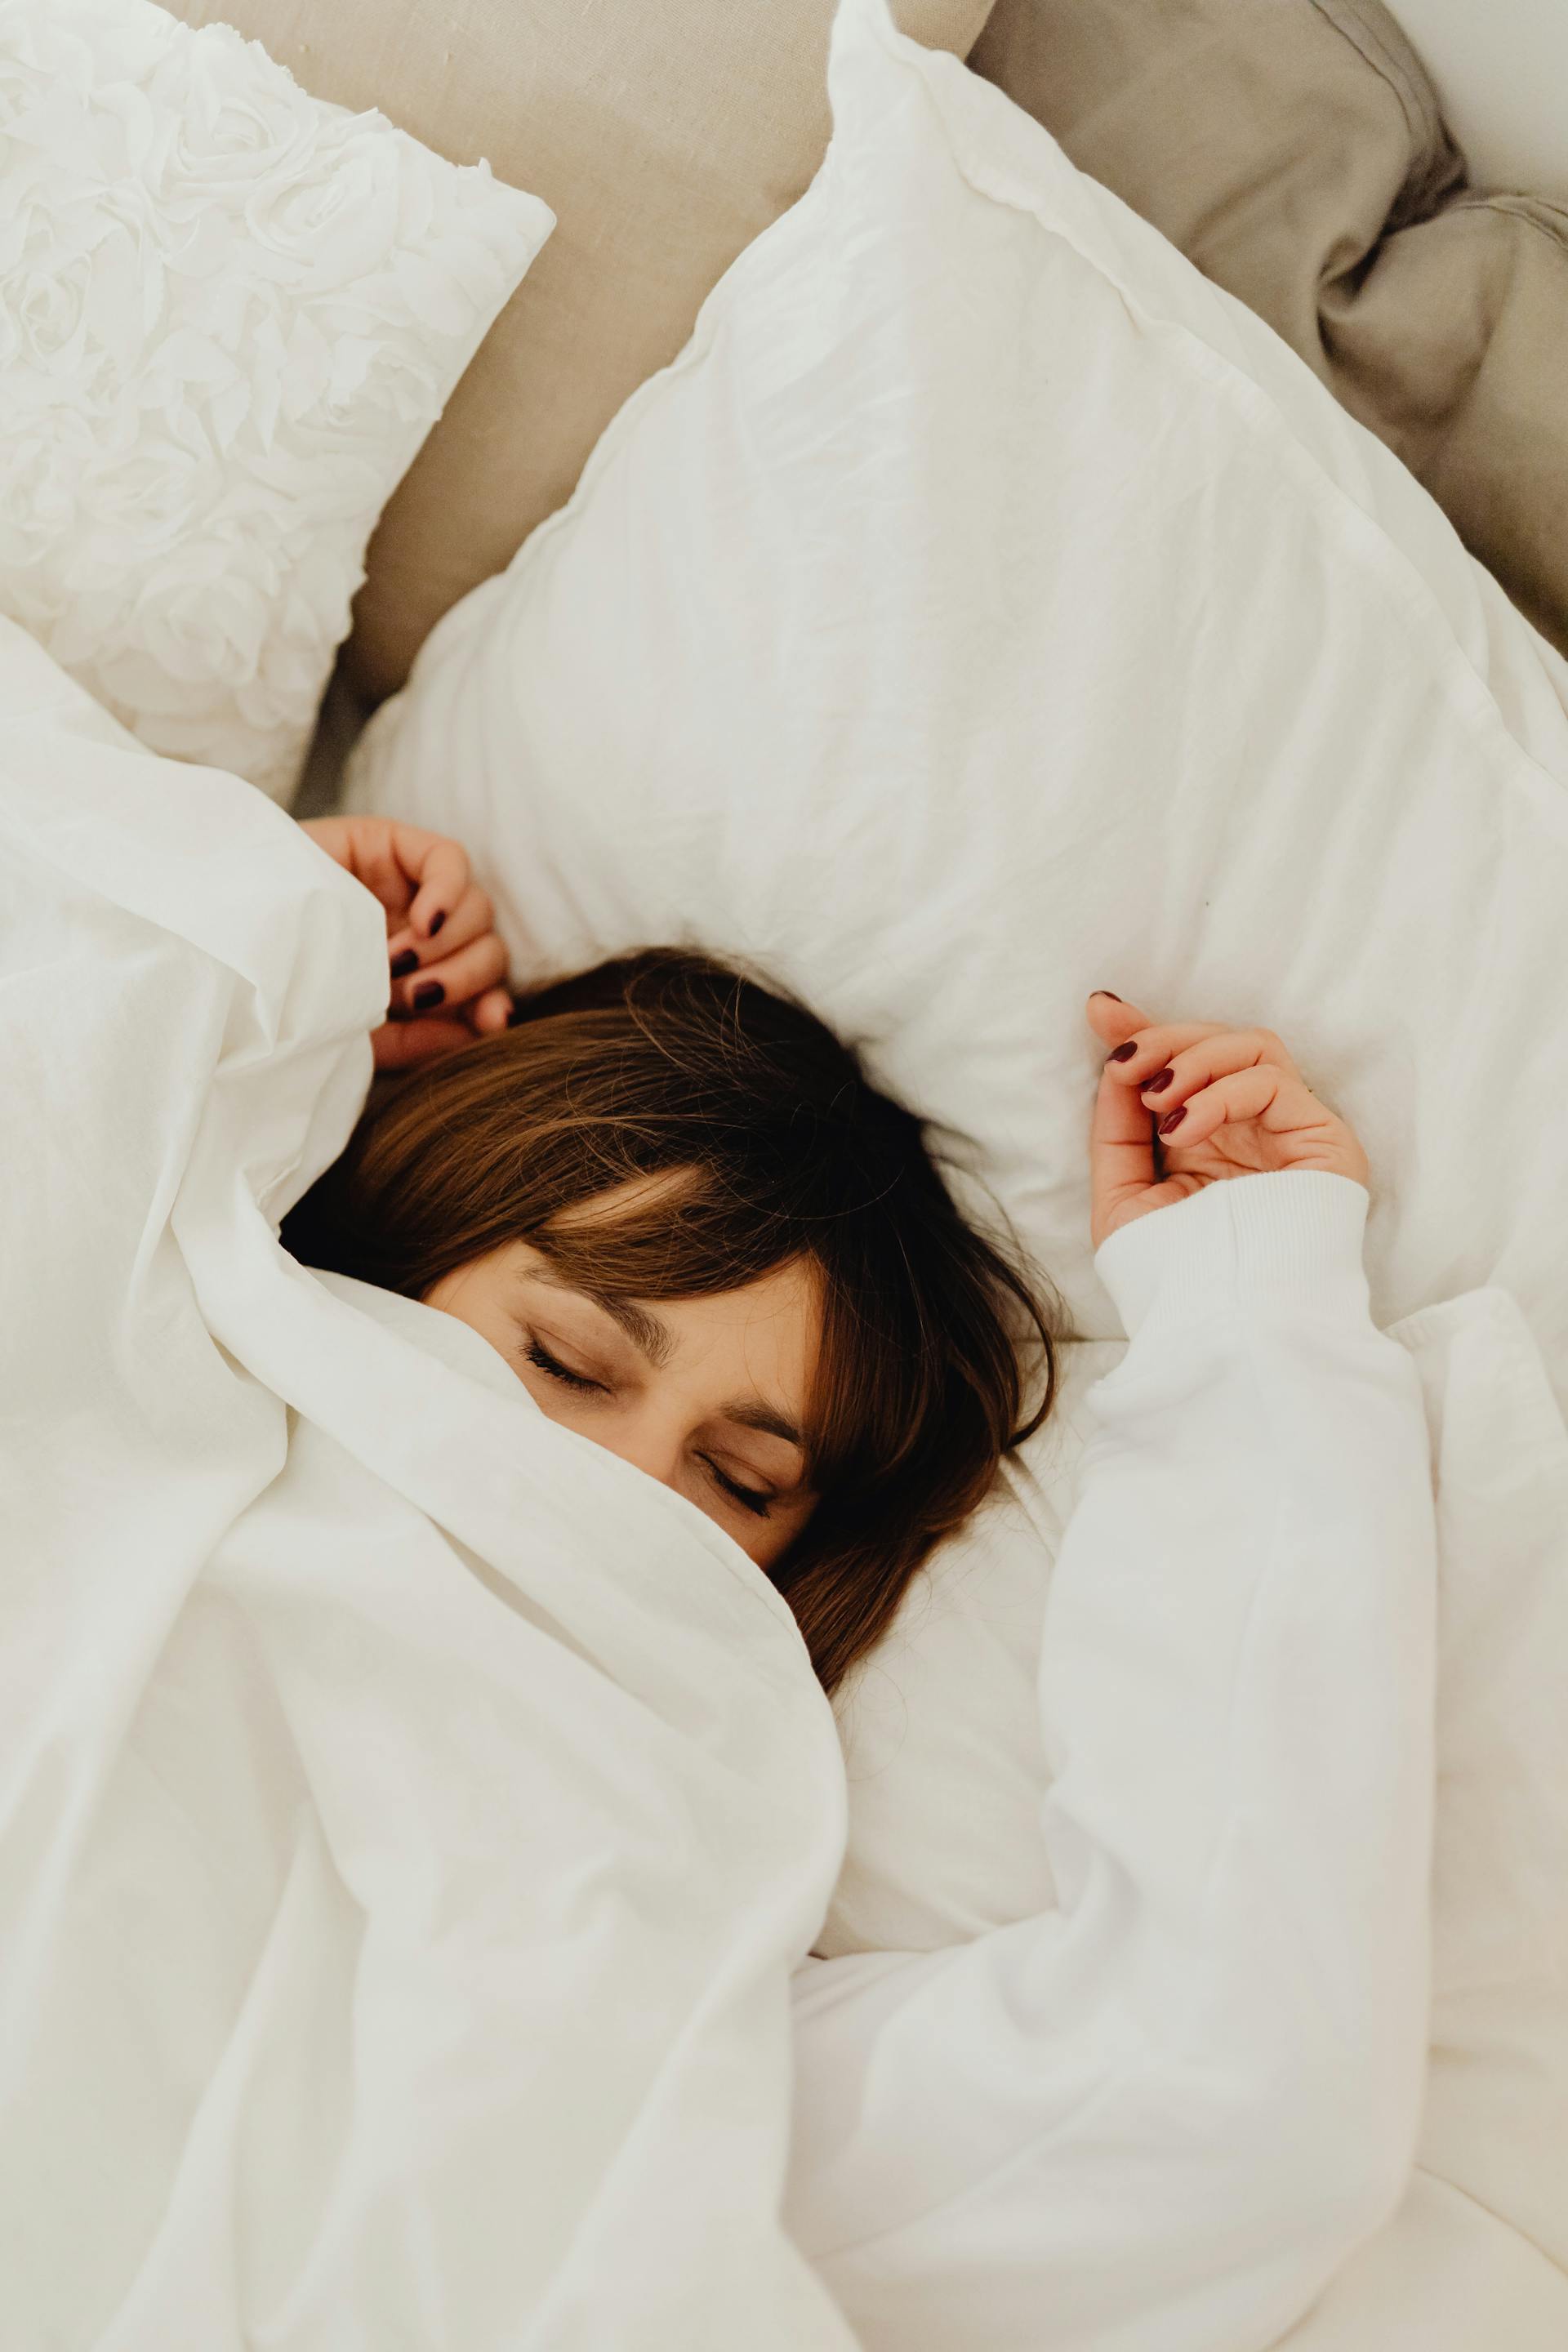 An exhausted woman lying down | Source: Pexels